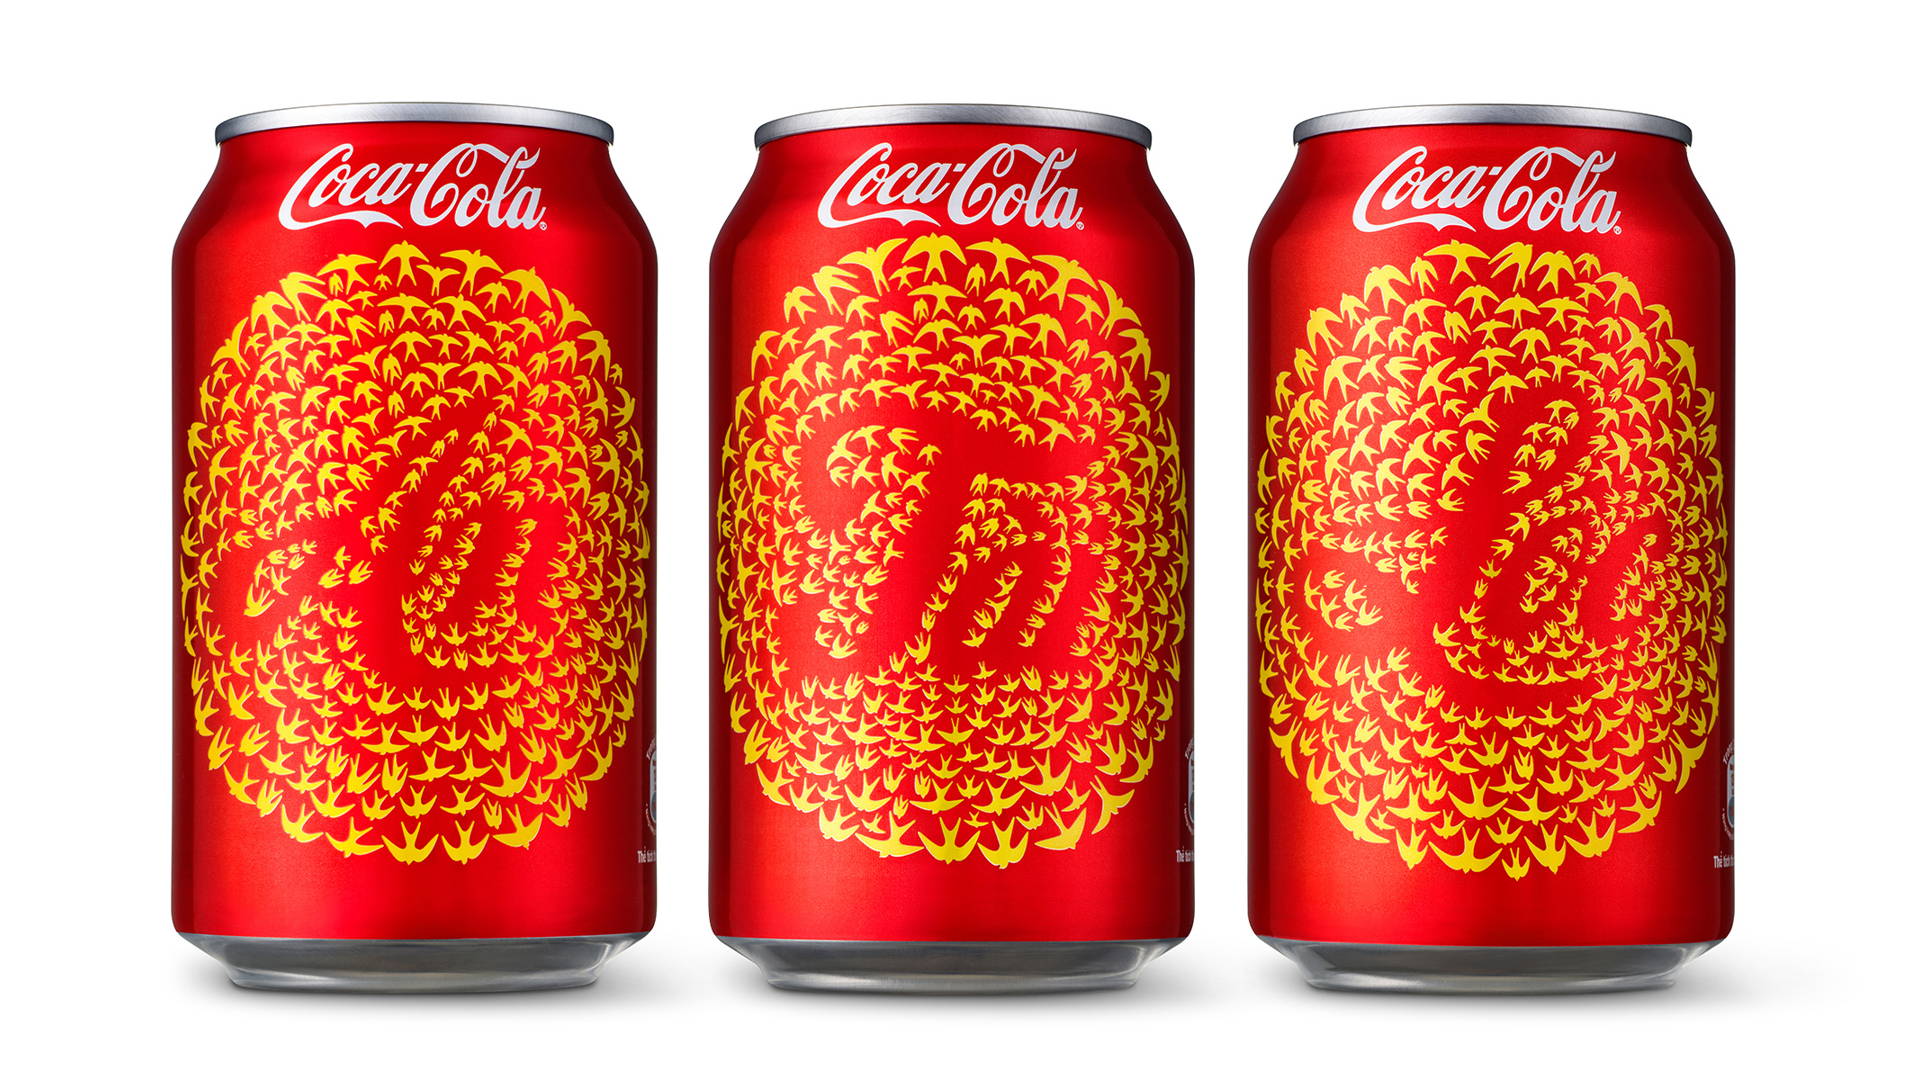 Featured image for Coca Cola - Têt 2014